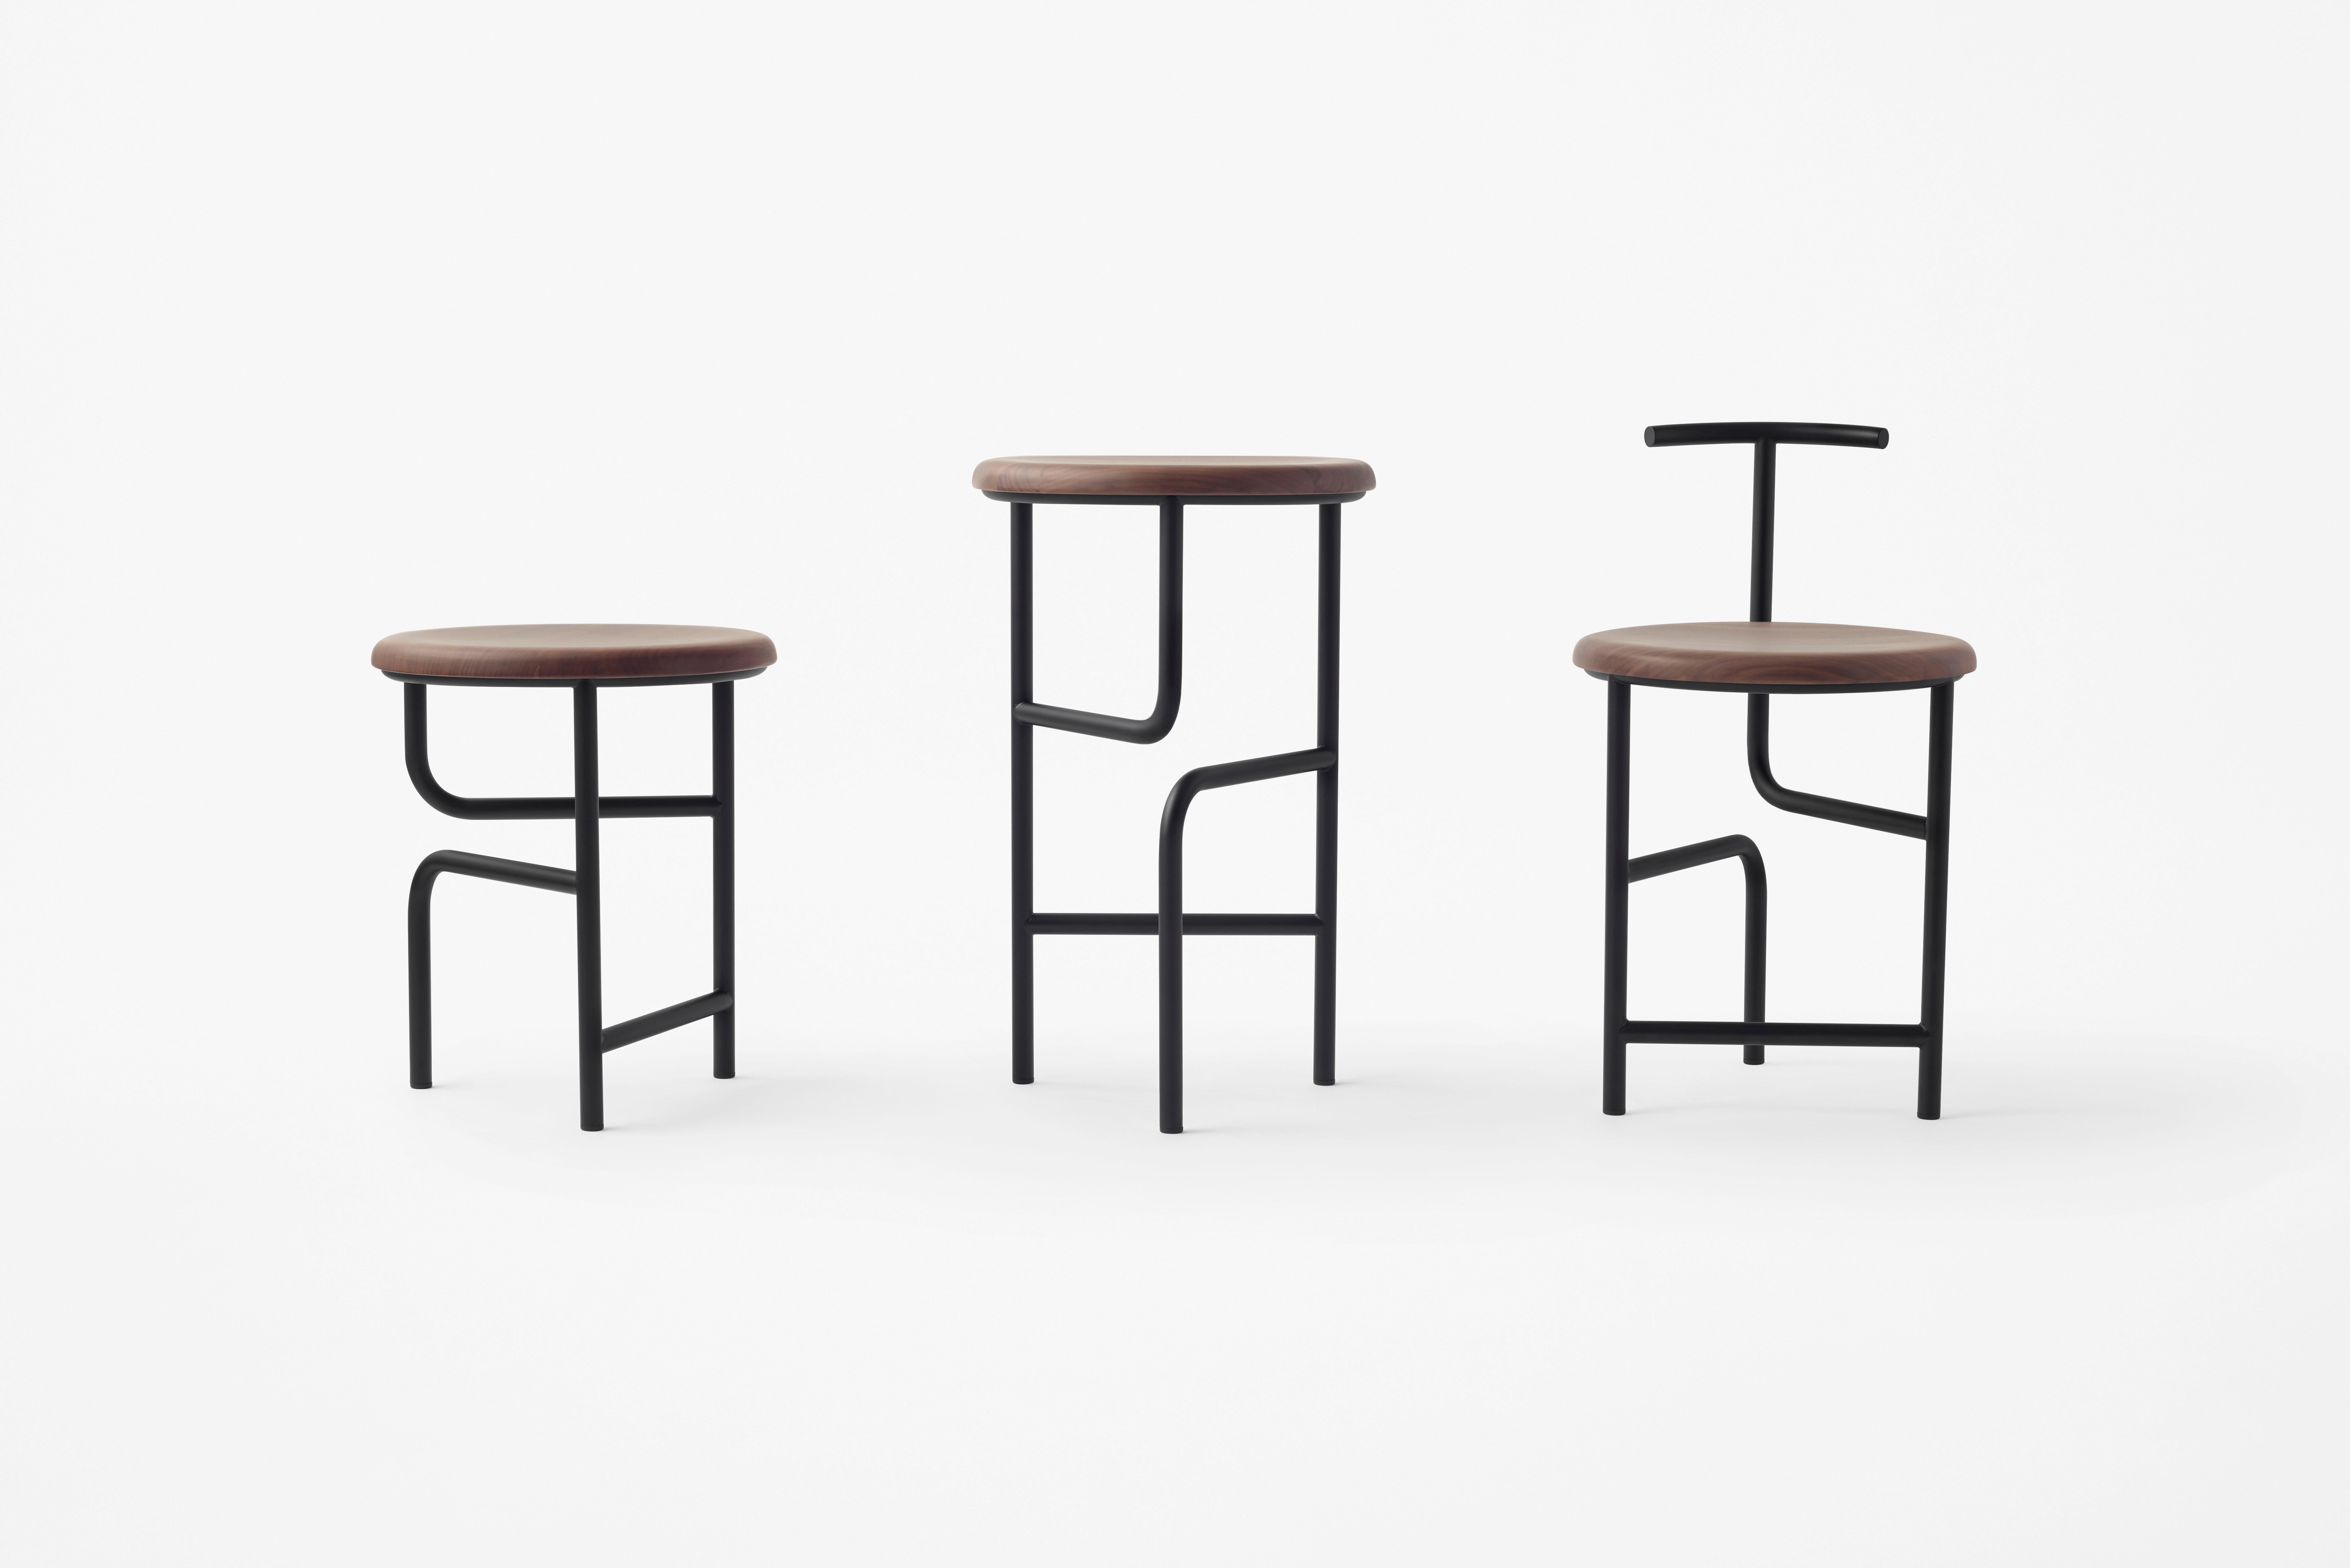 The blend stool from Stellar Works puts its curling form to work, showcasing a three-legged ensemble that appears to fold out from a parallel base. An open, visually lighter frame is counterpointed with the robust materials used to help it stand. It